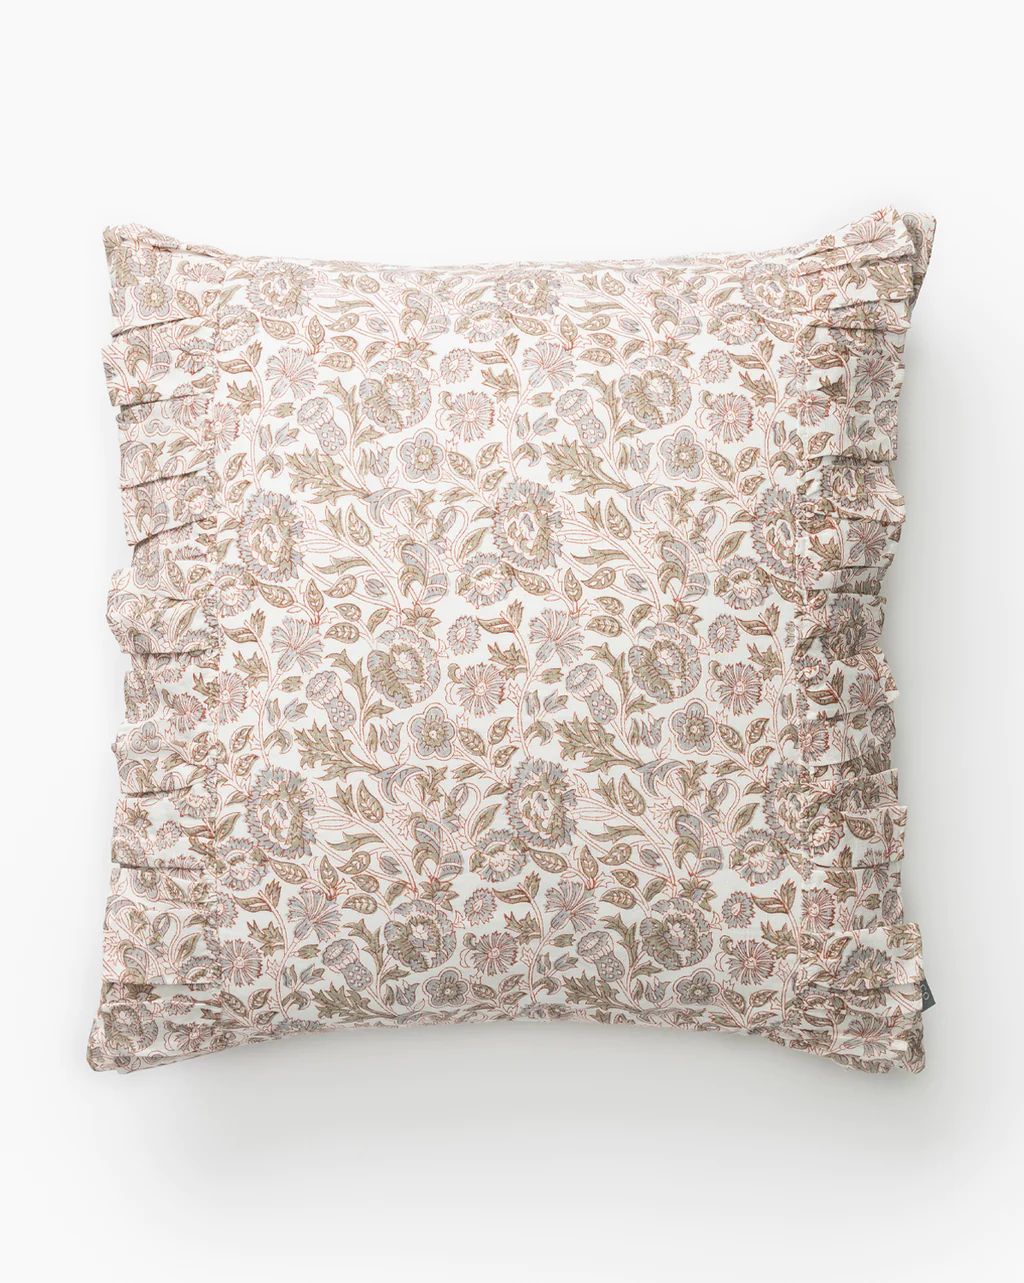 Clea Ruffle Pillow Cover | McGee & Co.